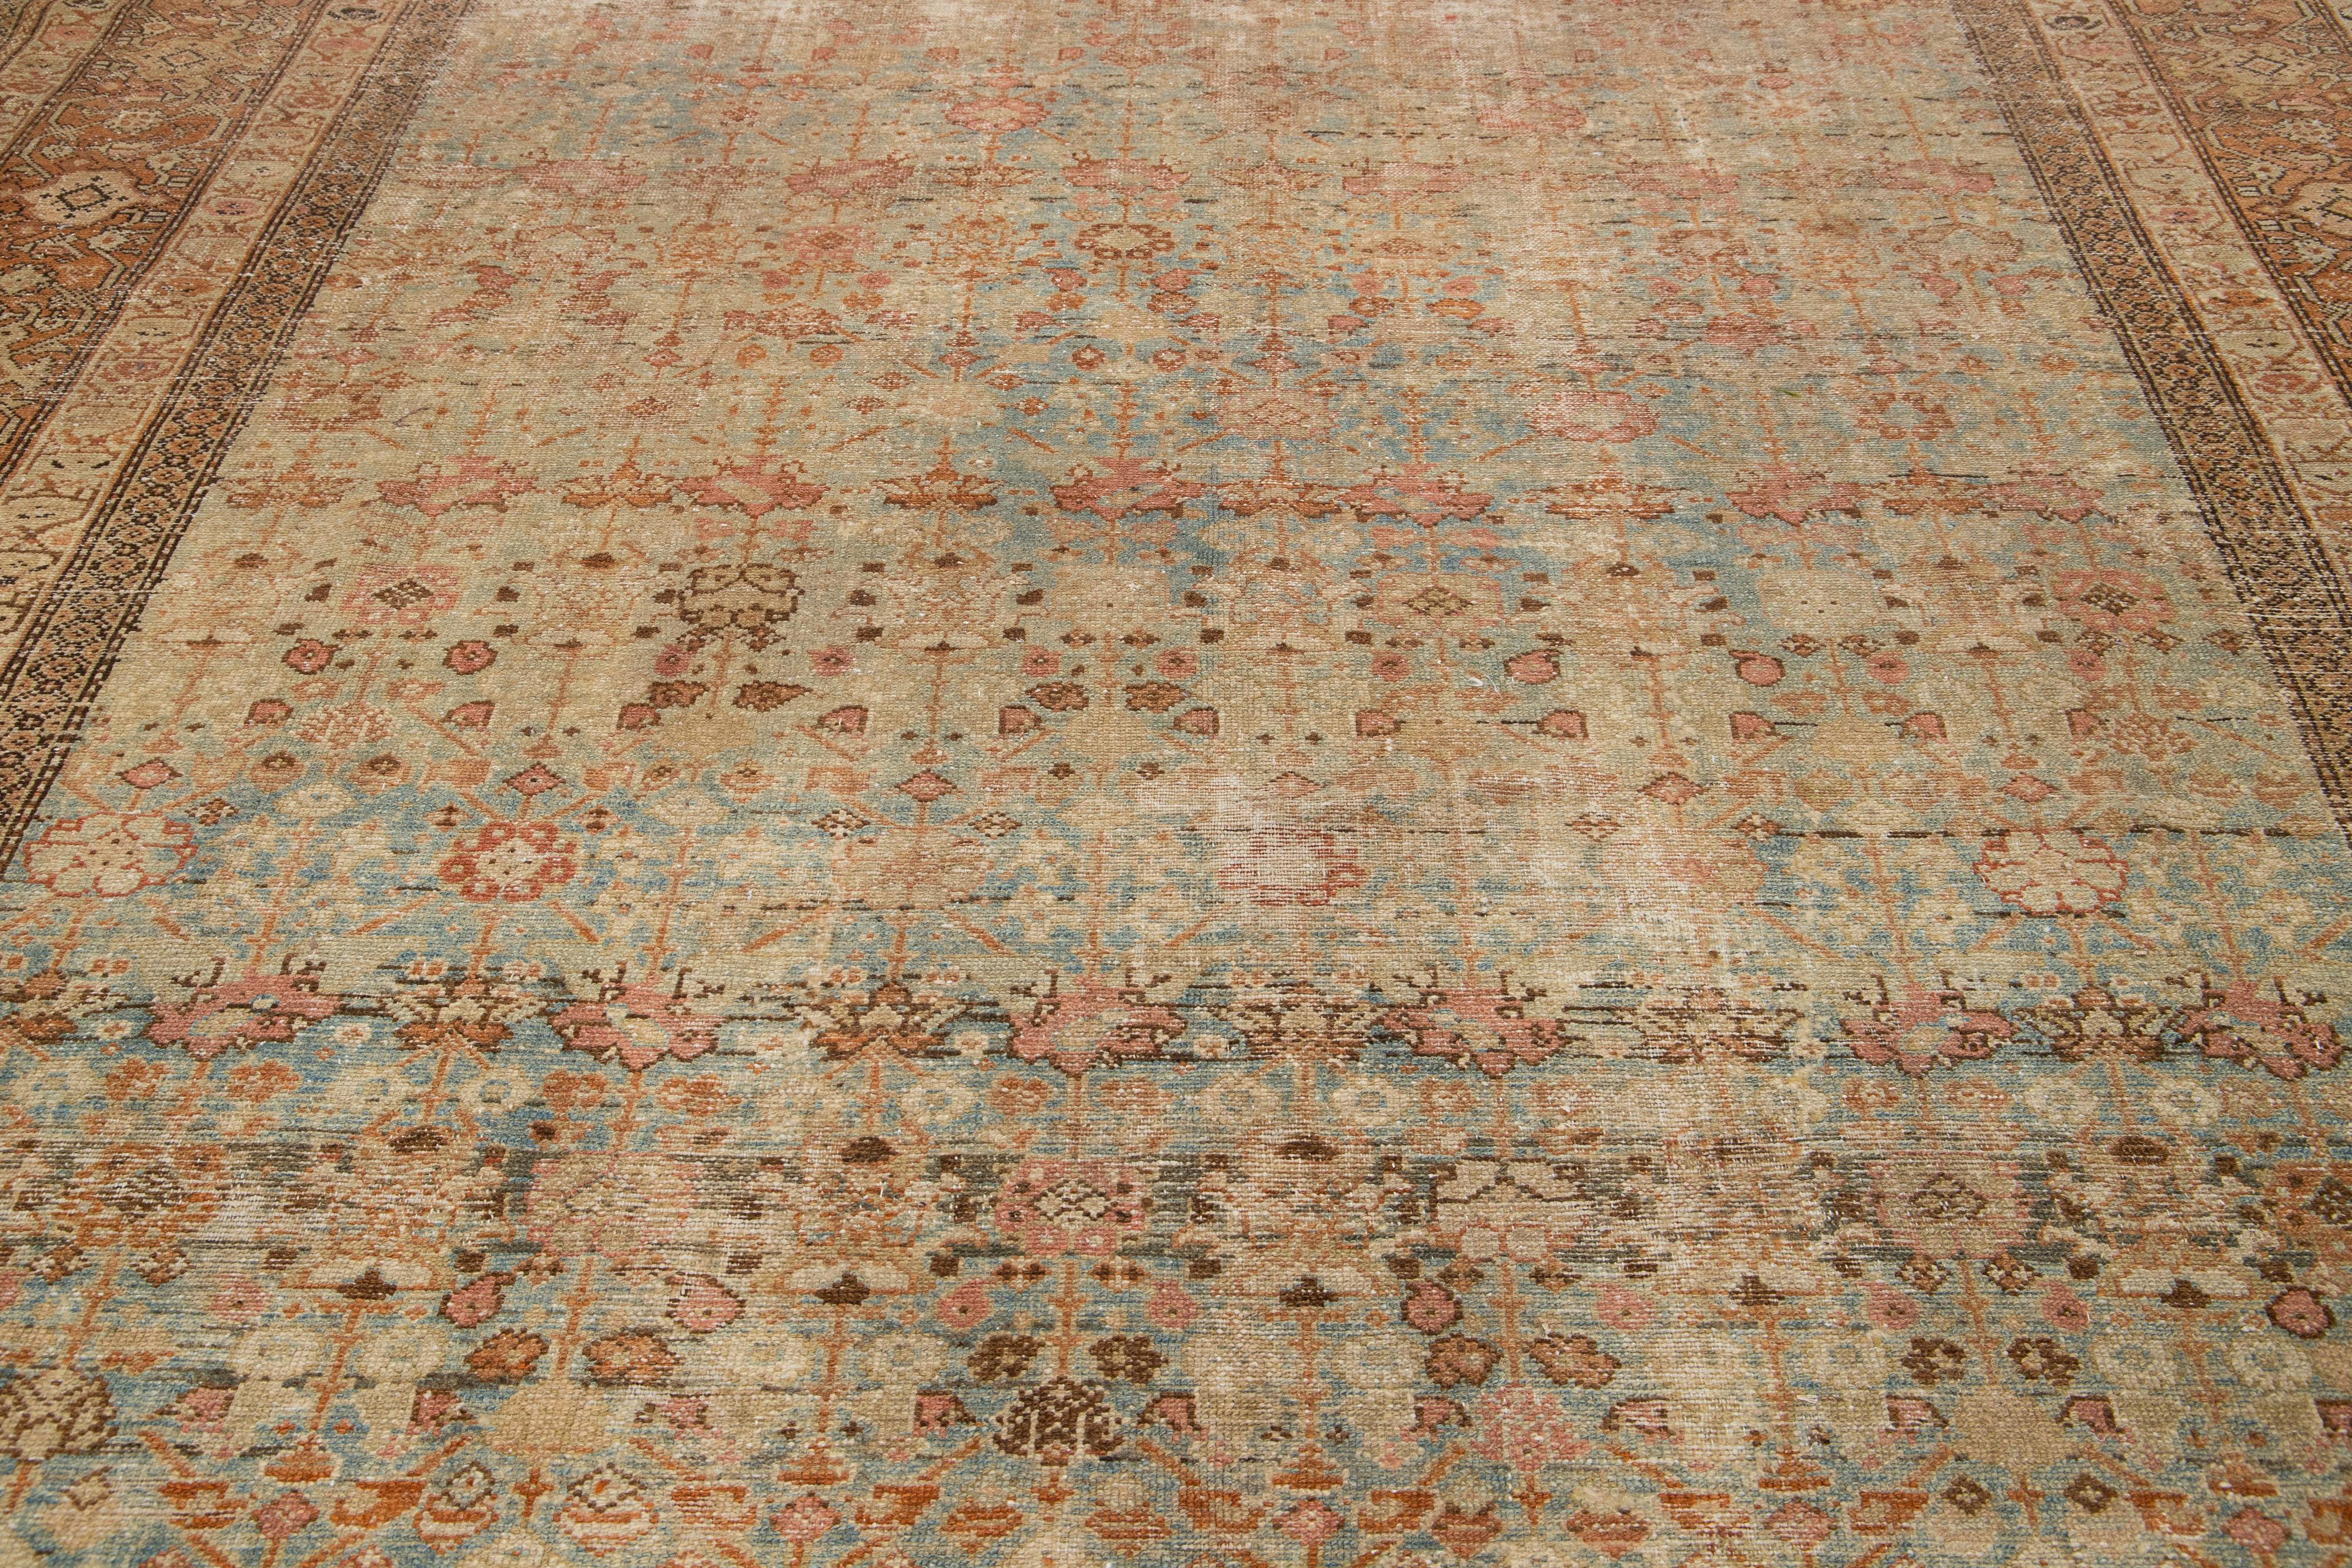 Handmade Antique Persian Malayer Wool Rug With Floral Motif From the 1920s For Sale 1